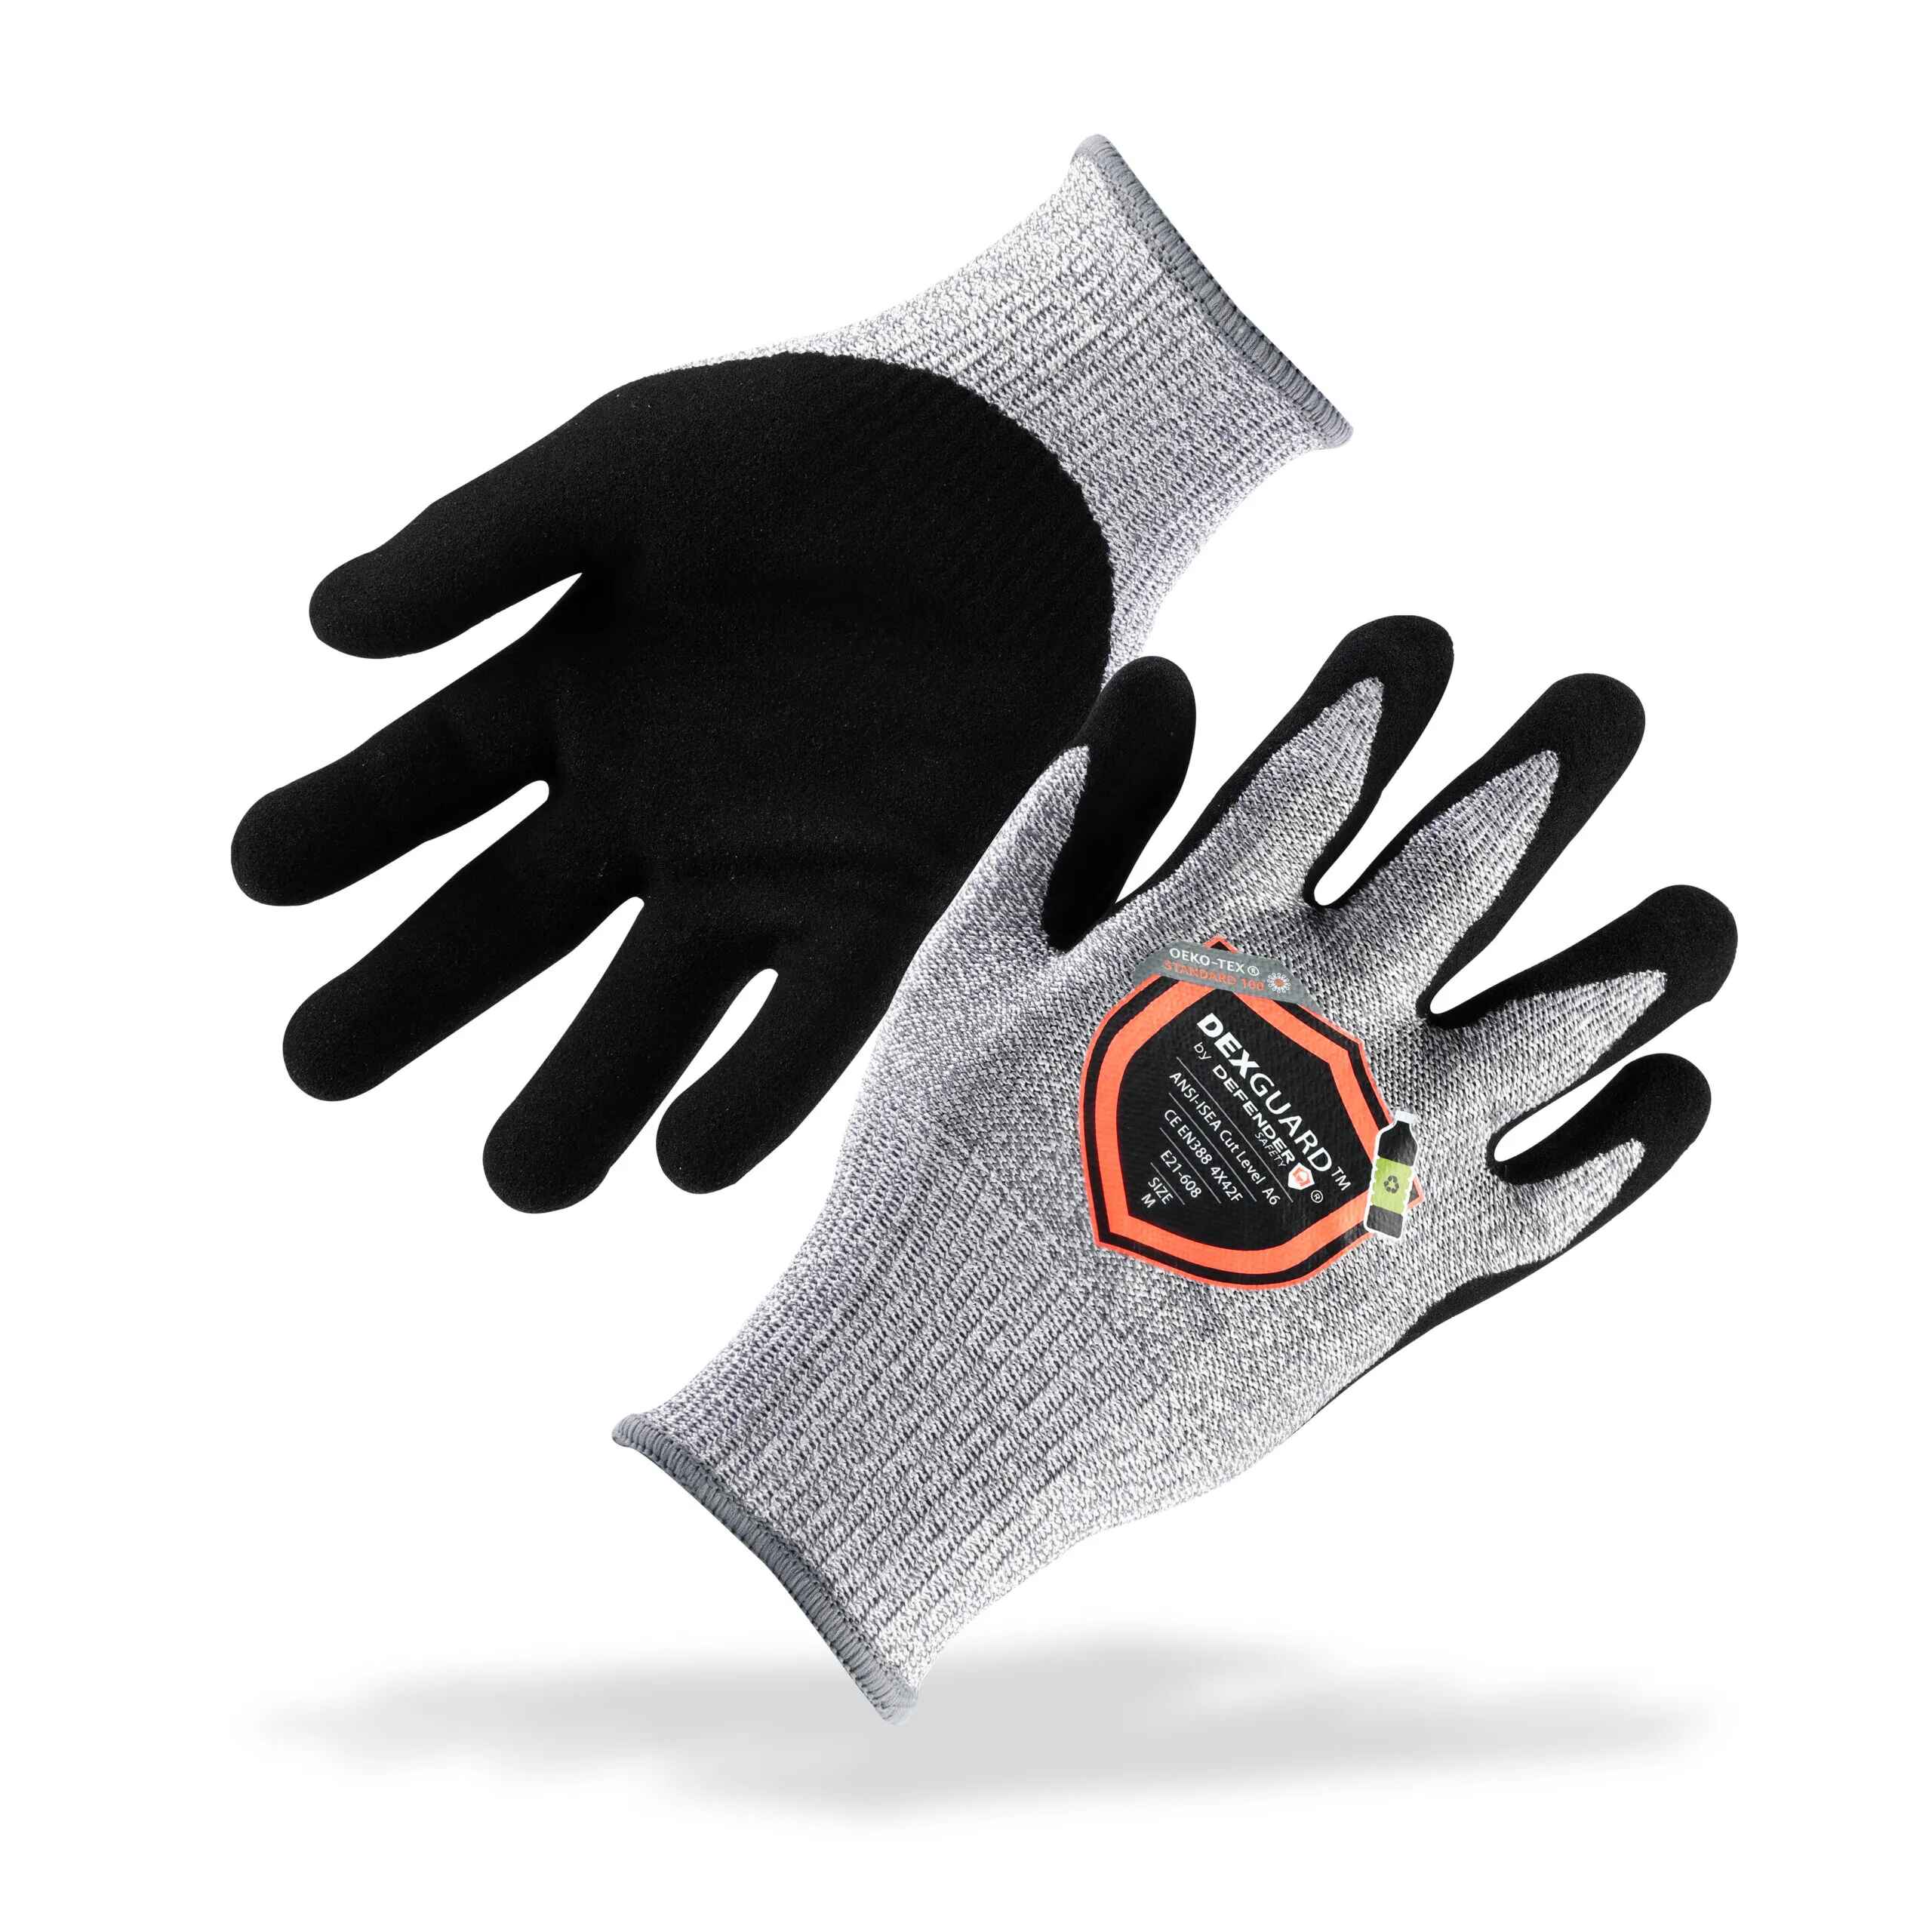 https://defendersafety.com/cdn/shop/products/dexguard-a6-cut-gloves-level-4-abrasion-resistant-textured-nitrile-coating-touch-screen-compatible-787636.jpg?v=1690825177&width=2560